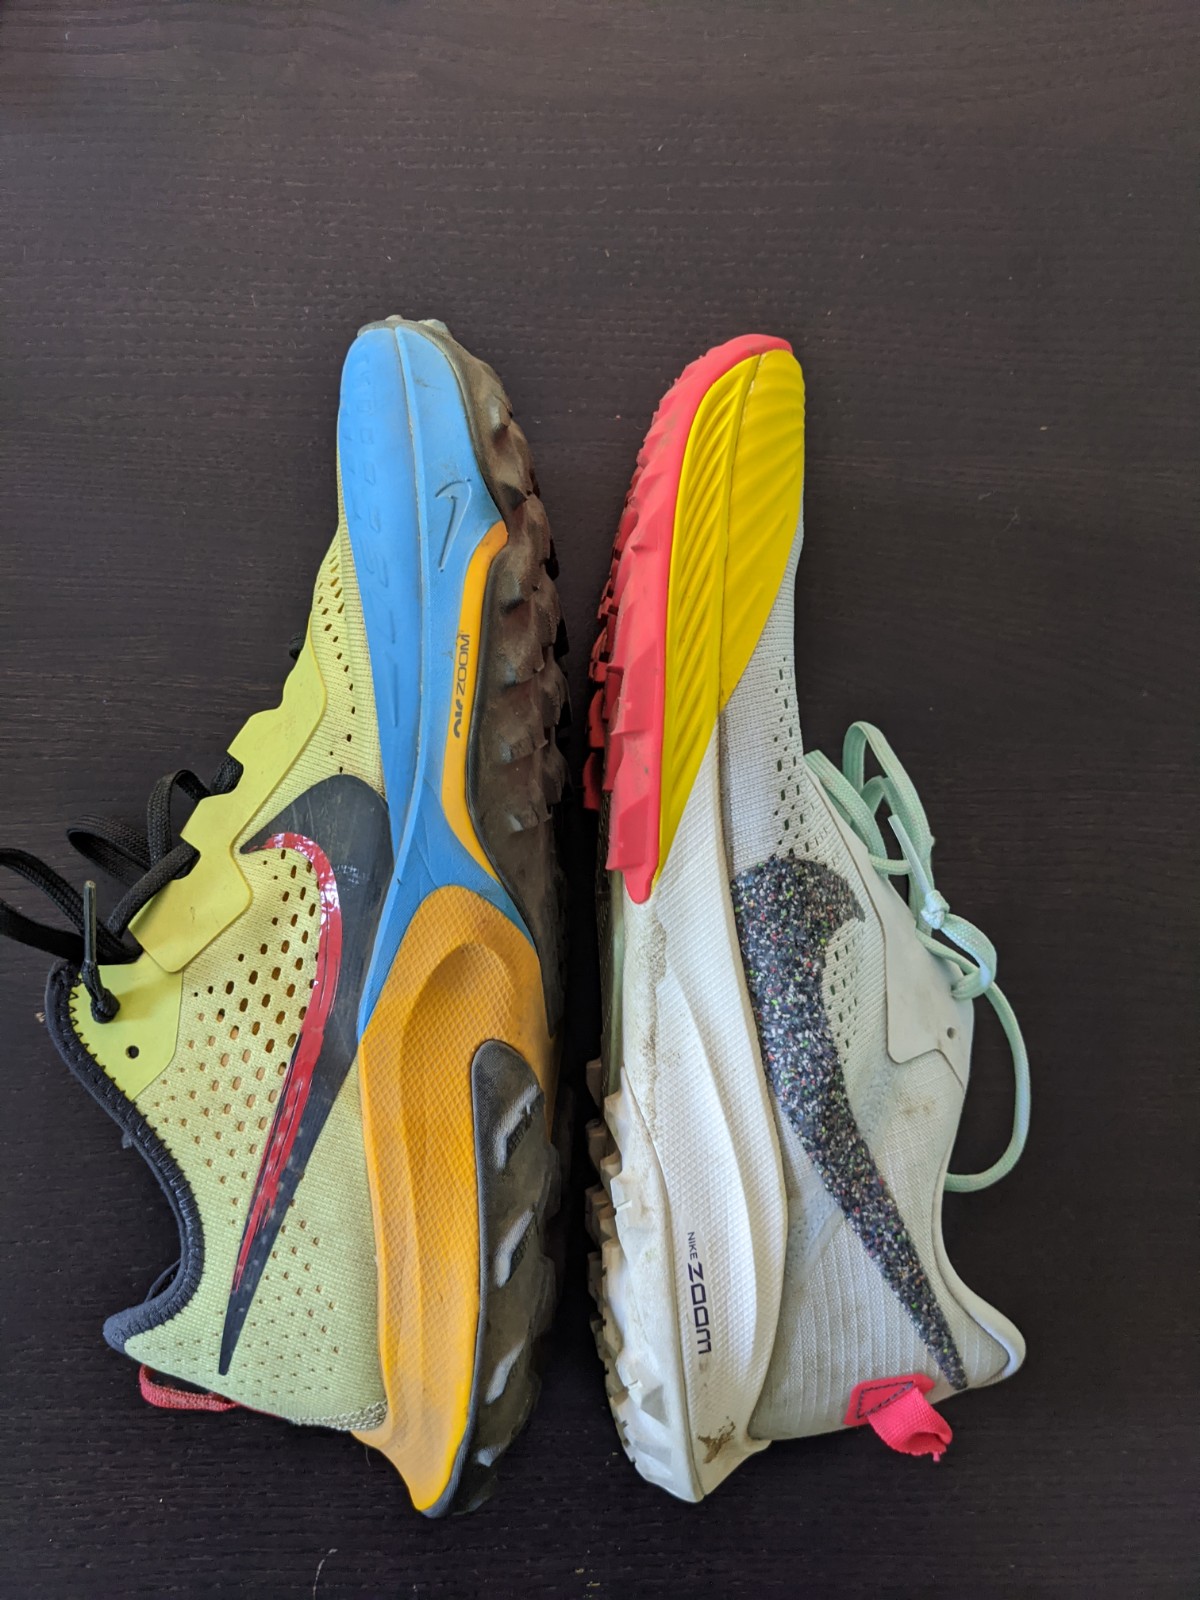 Road Trail Run: Nike Air Zoom Terra Kiger 7 Multi Tester Review: on the  trail to max cushion, ultra distance territory!